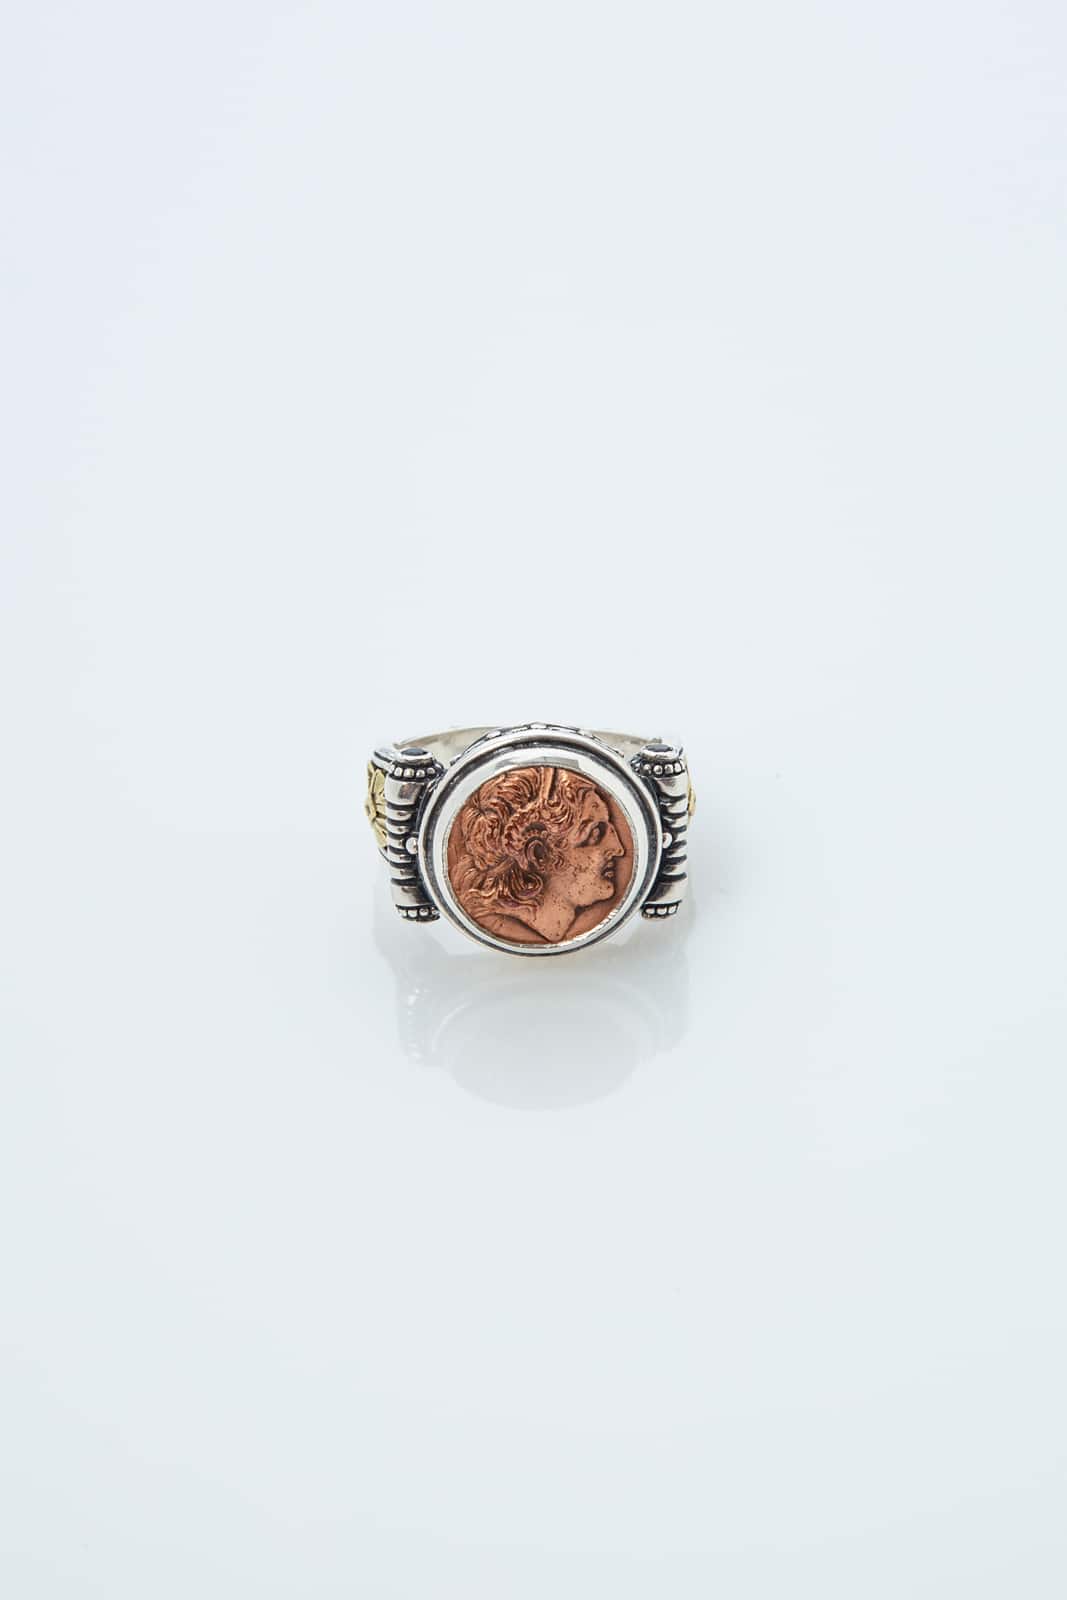 COIN RING IN SILVER - 18K GOLD & COPPER MOTIF OF ALEXANDER